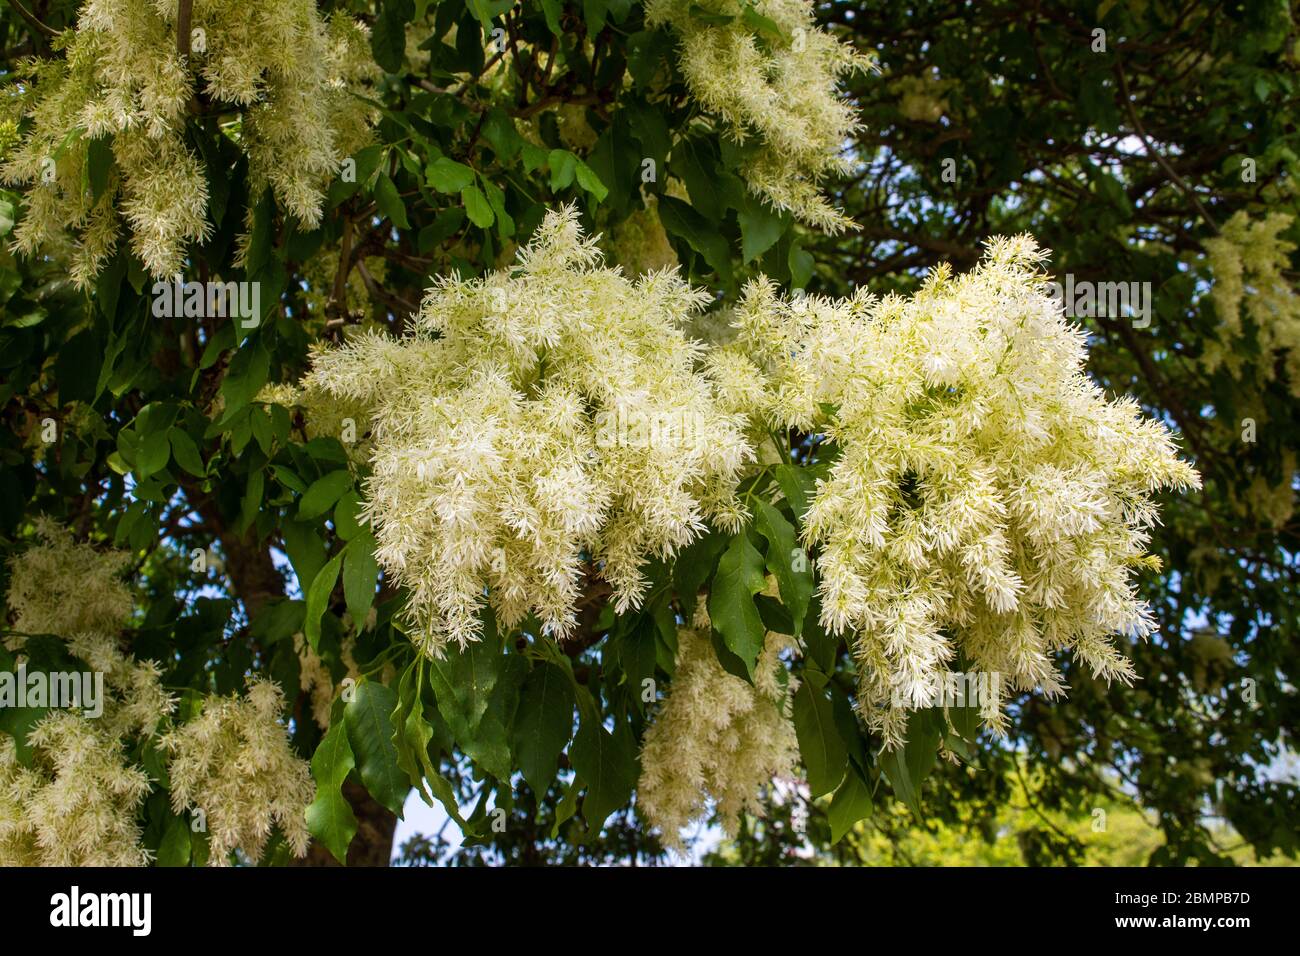 Manna Plant High Resolution Stock Photography and Images - Alamy